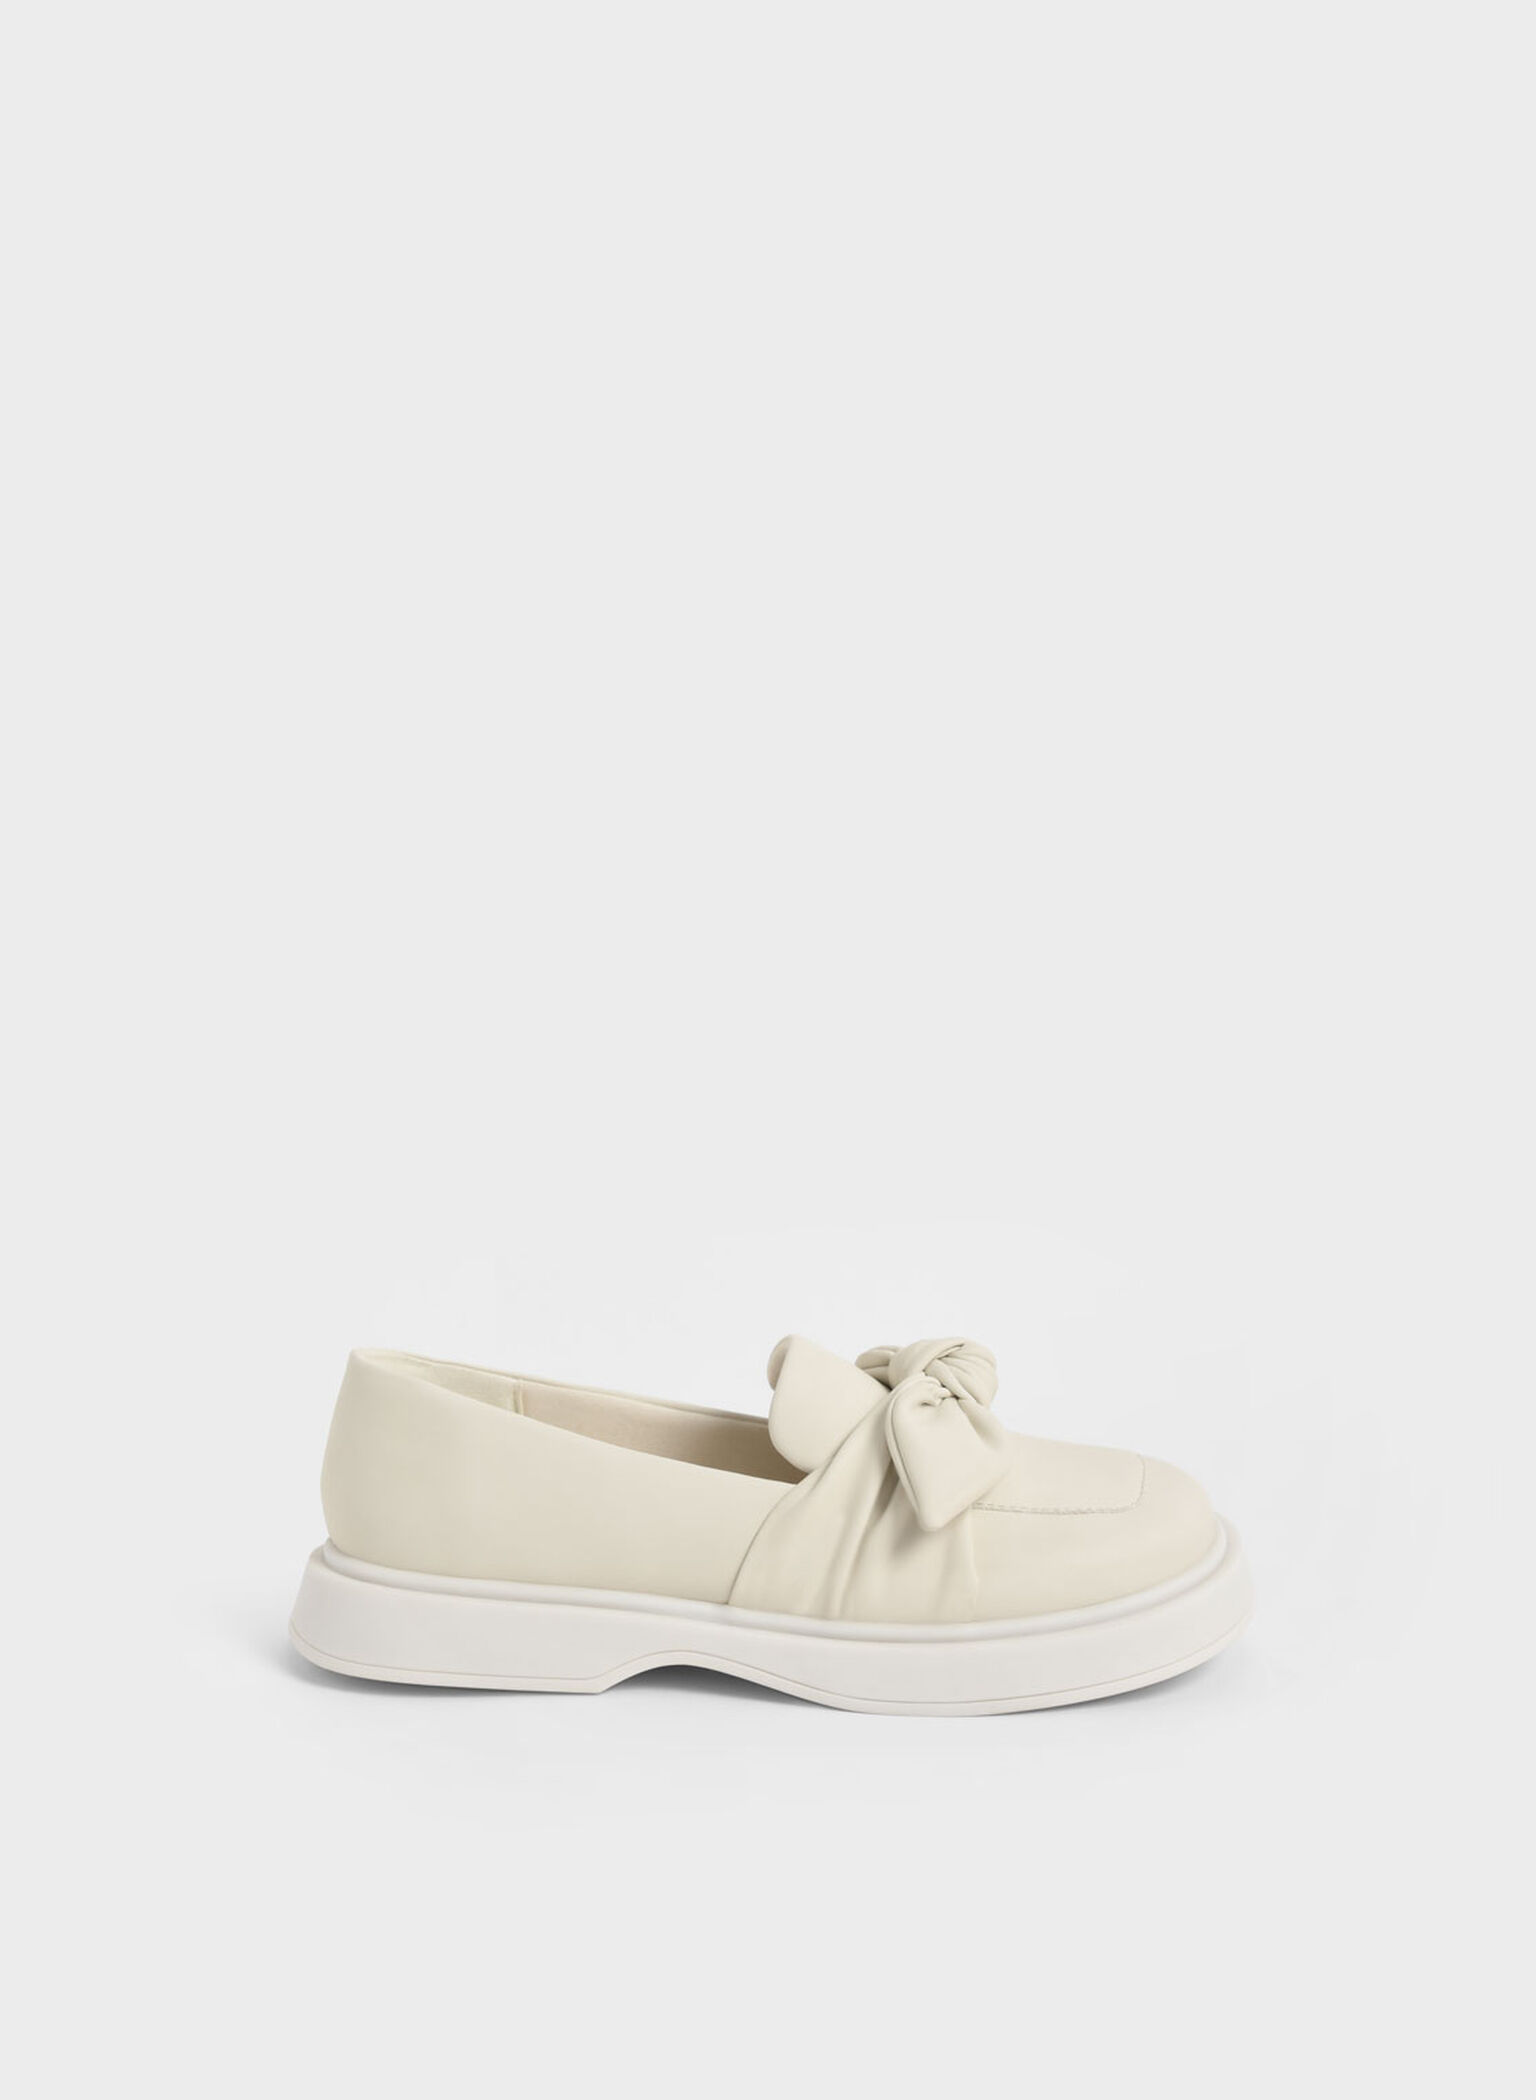 Girls' Bow Loafers, Chalk, hi-res